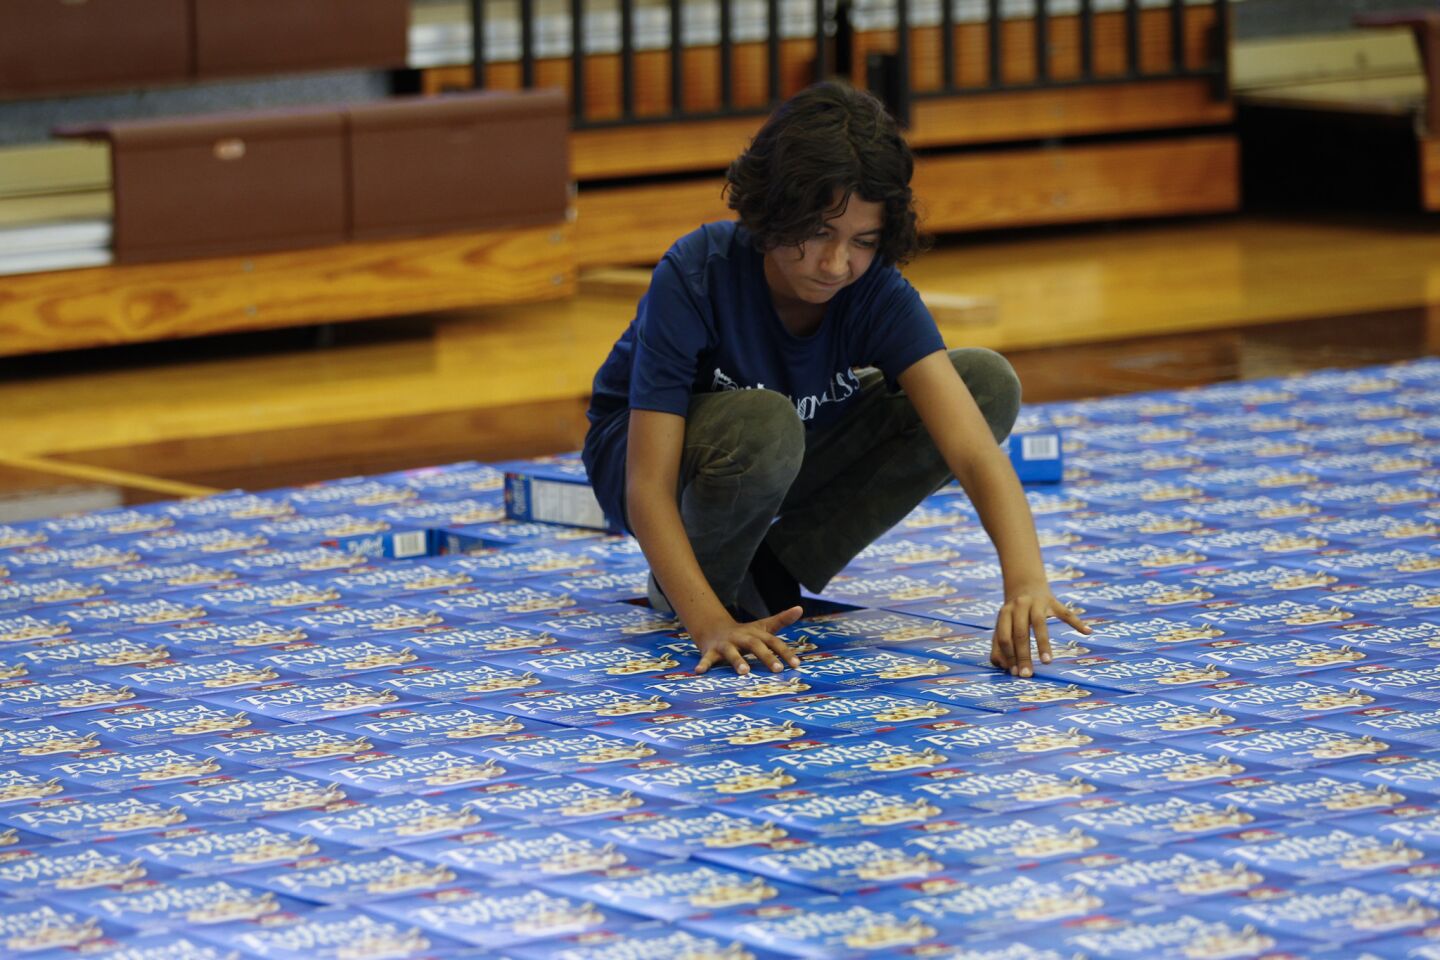 Taj Gillin works on aligning the cereal boxes as he and his team from Francis Parker School attempt to break the world’s largest cardboard box mosaic on Sunday.